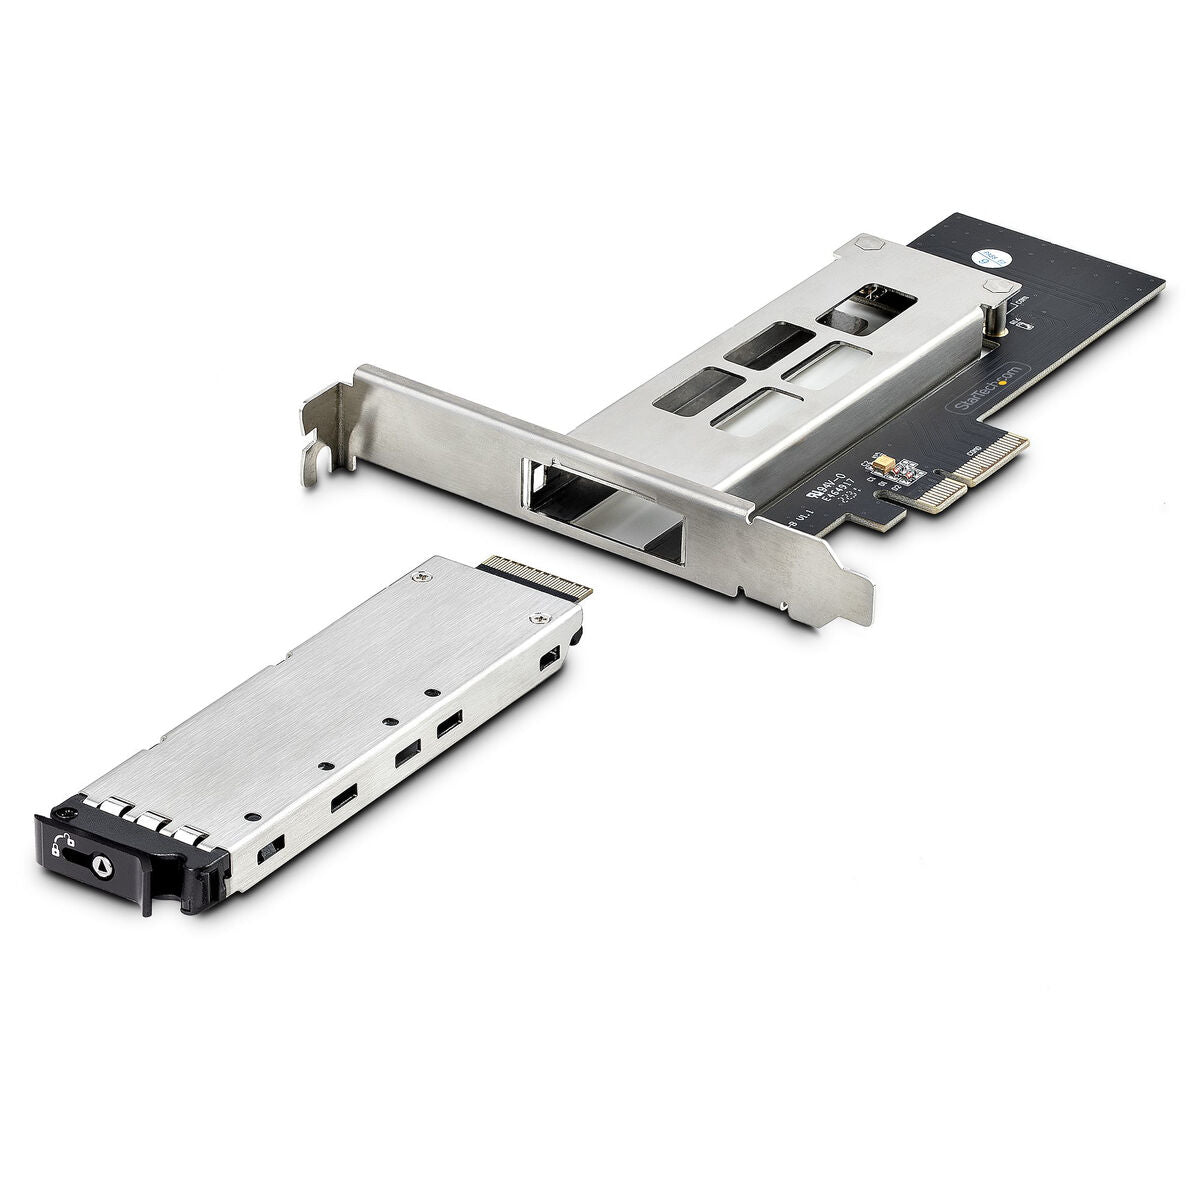 PCI Card SSD M.2 Startech M2-REMOVABLE-PCIE-N1, Startech, Computing, Data storage, pci-card-ssd-m-2-startech-m2-removable-pcie-n1, Brand_Startech, category-reference-2609, category-reference-2803, category-reference-2806, category-reference-2811, category-reference-t-19685, category-reference-t-19909, category-reference-t-21357, category-reference-t-25638, computers / components, Condition_NEW, Price_100 - 200, Teleworking, RiotNook